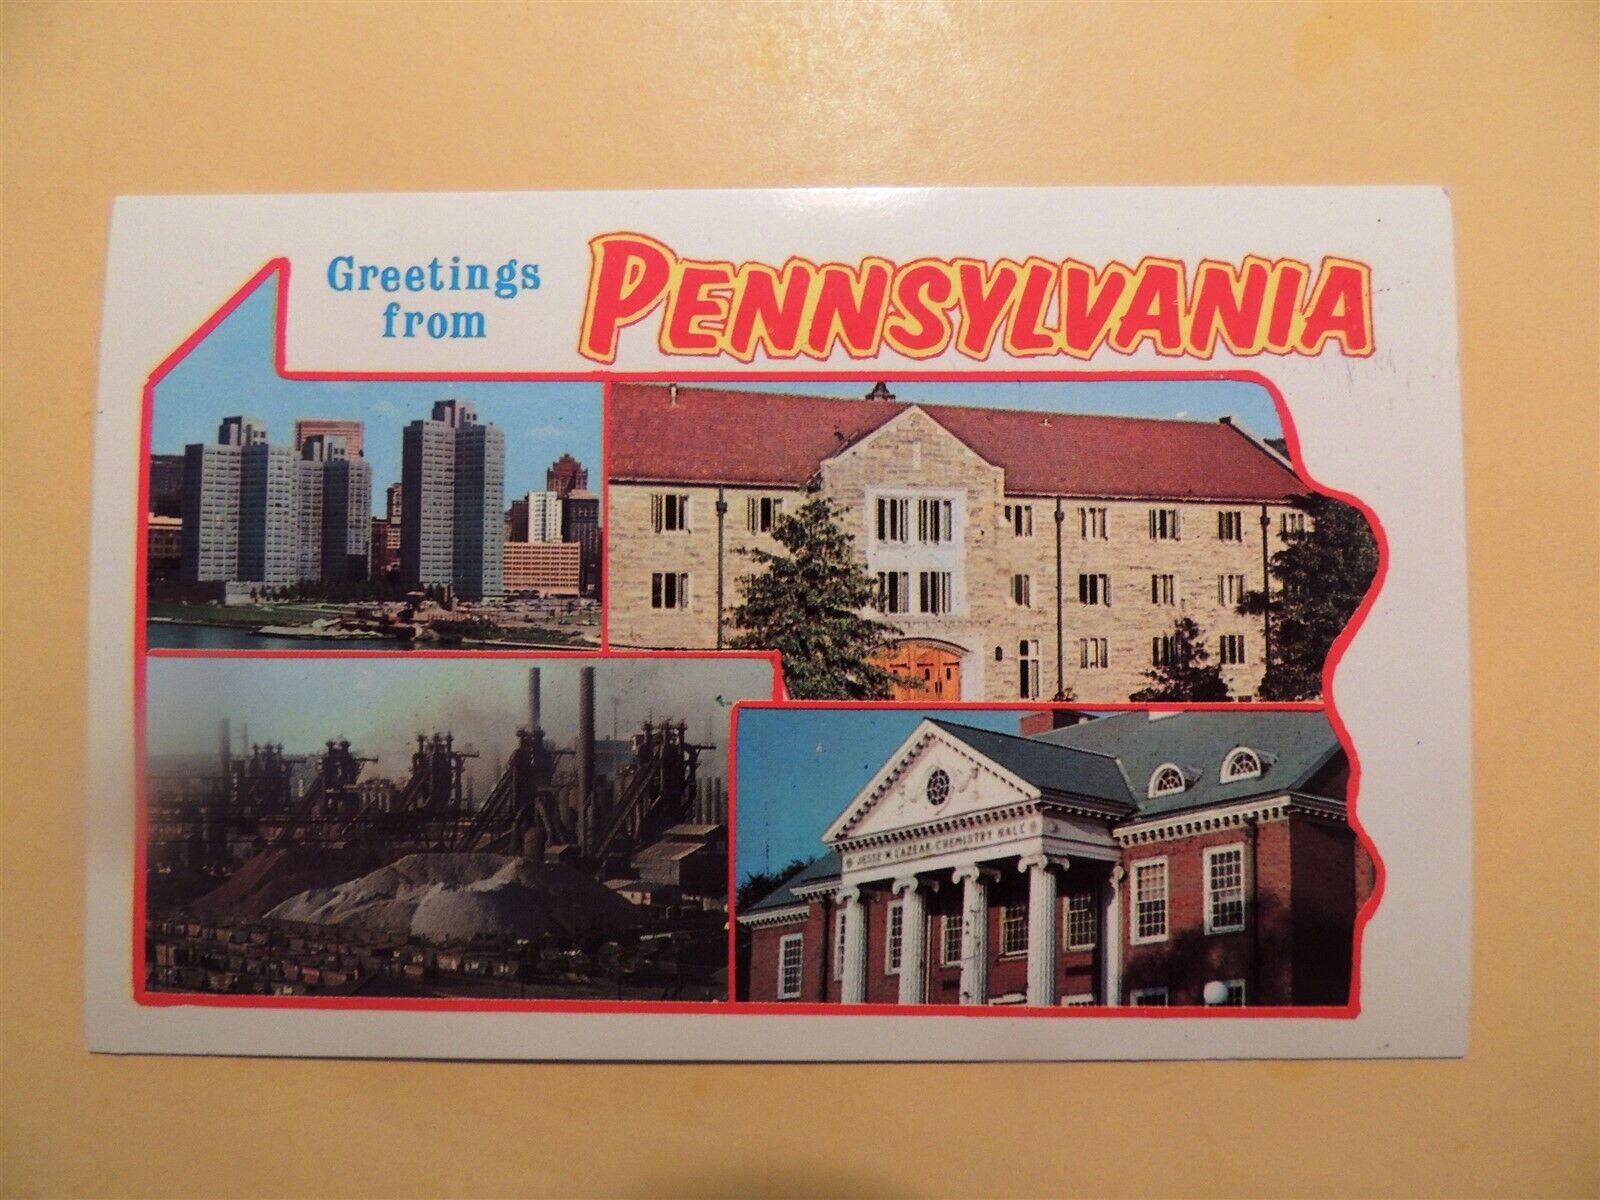 Greetings from Pennsylvania vintage map postcard multiple scenic views